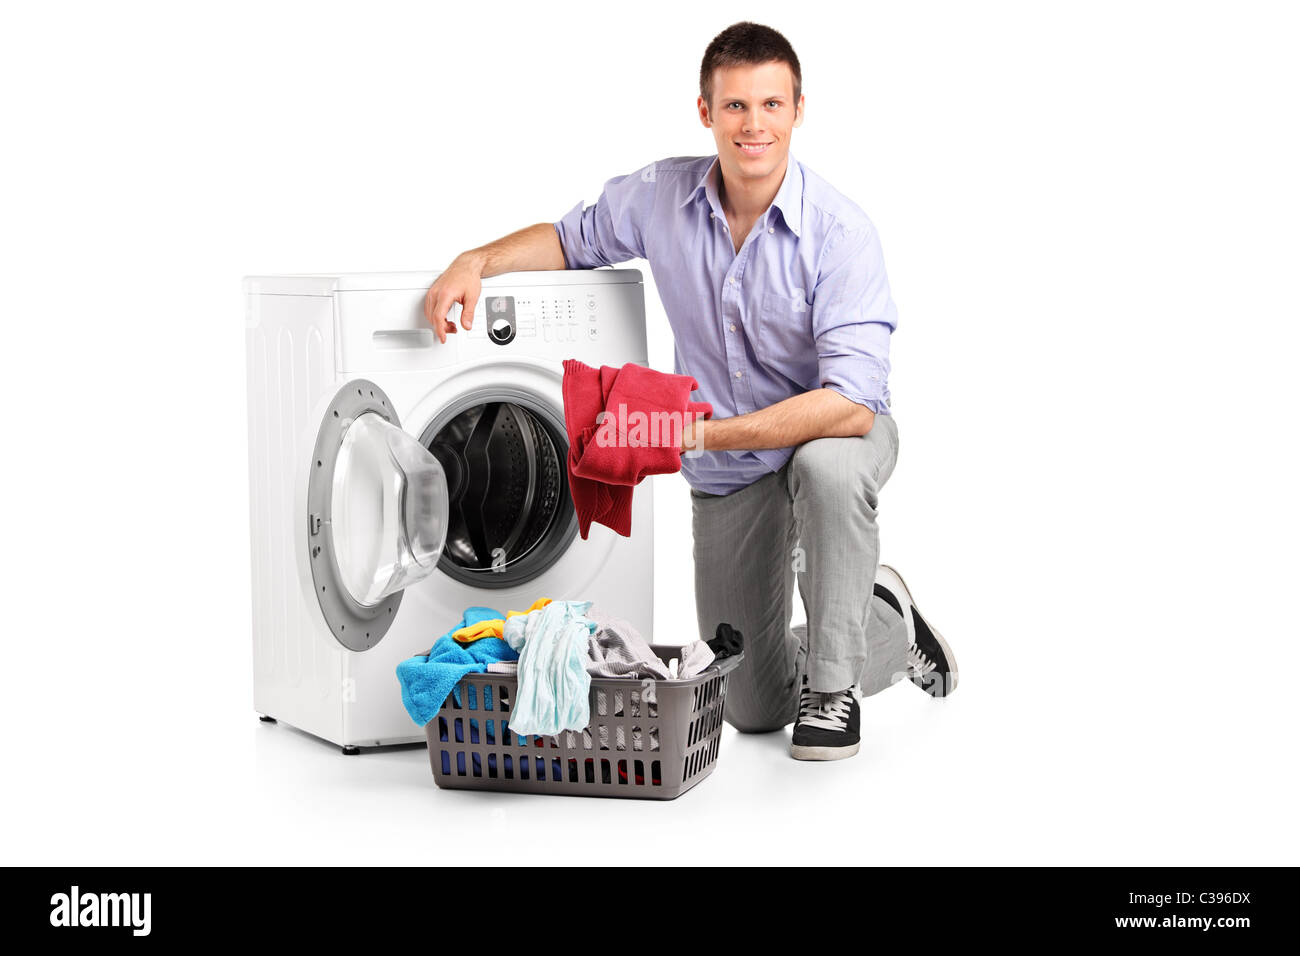 Young man putting clothes into washing machine and smiling Stock Photo